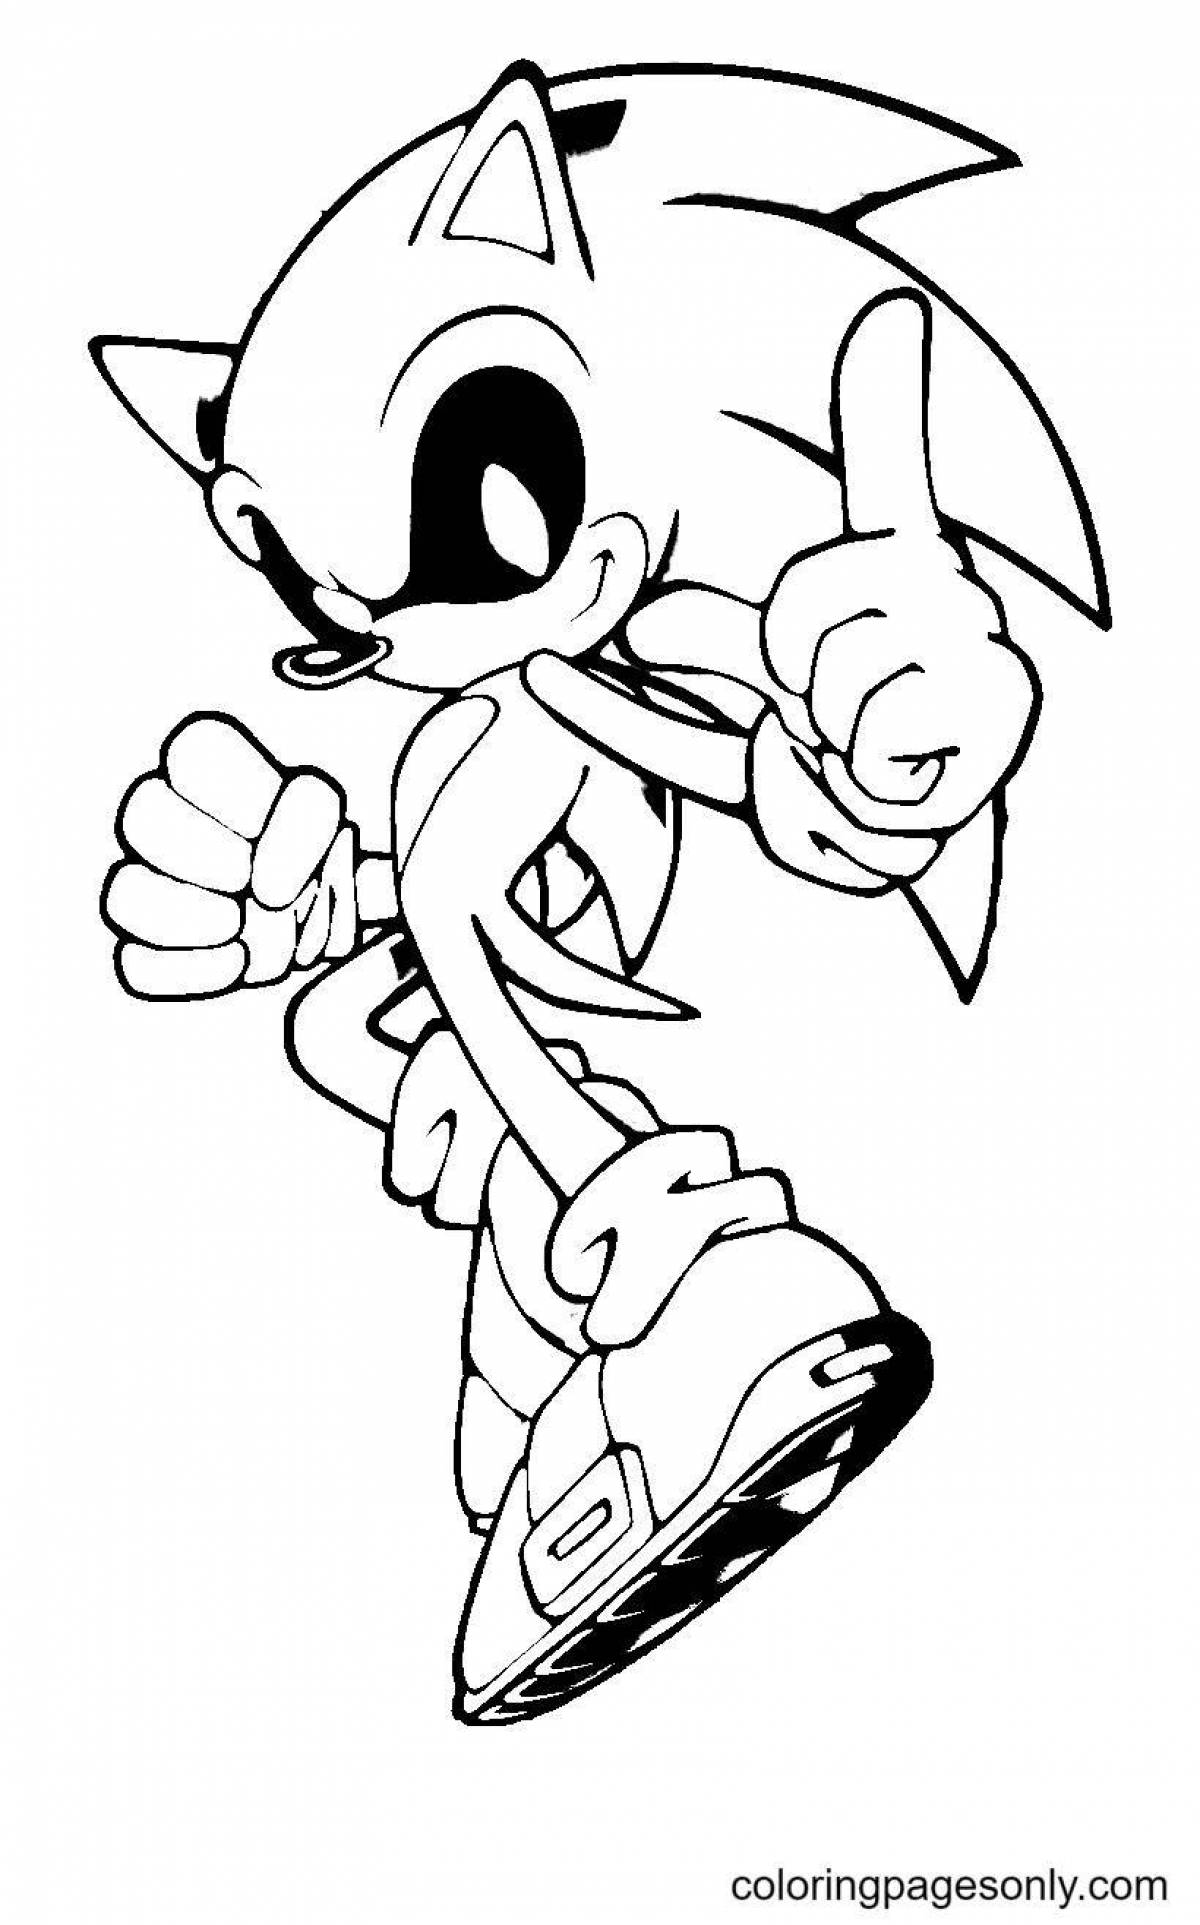 Colorful sonic exe coloring book for kids